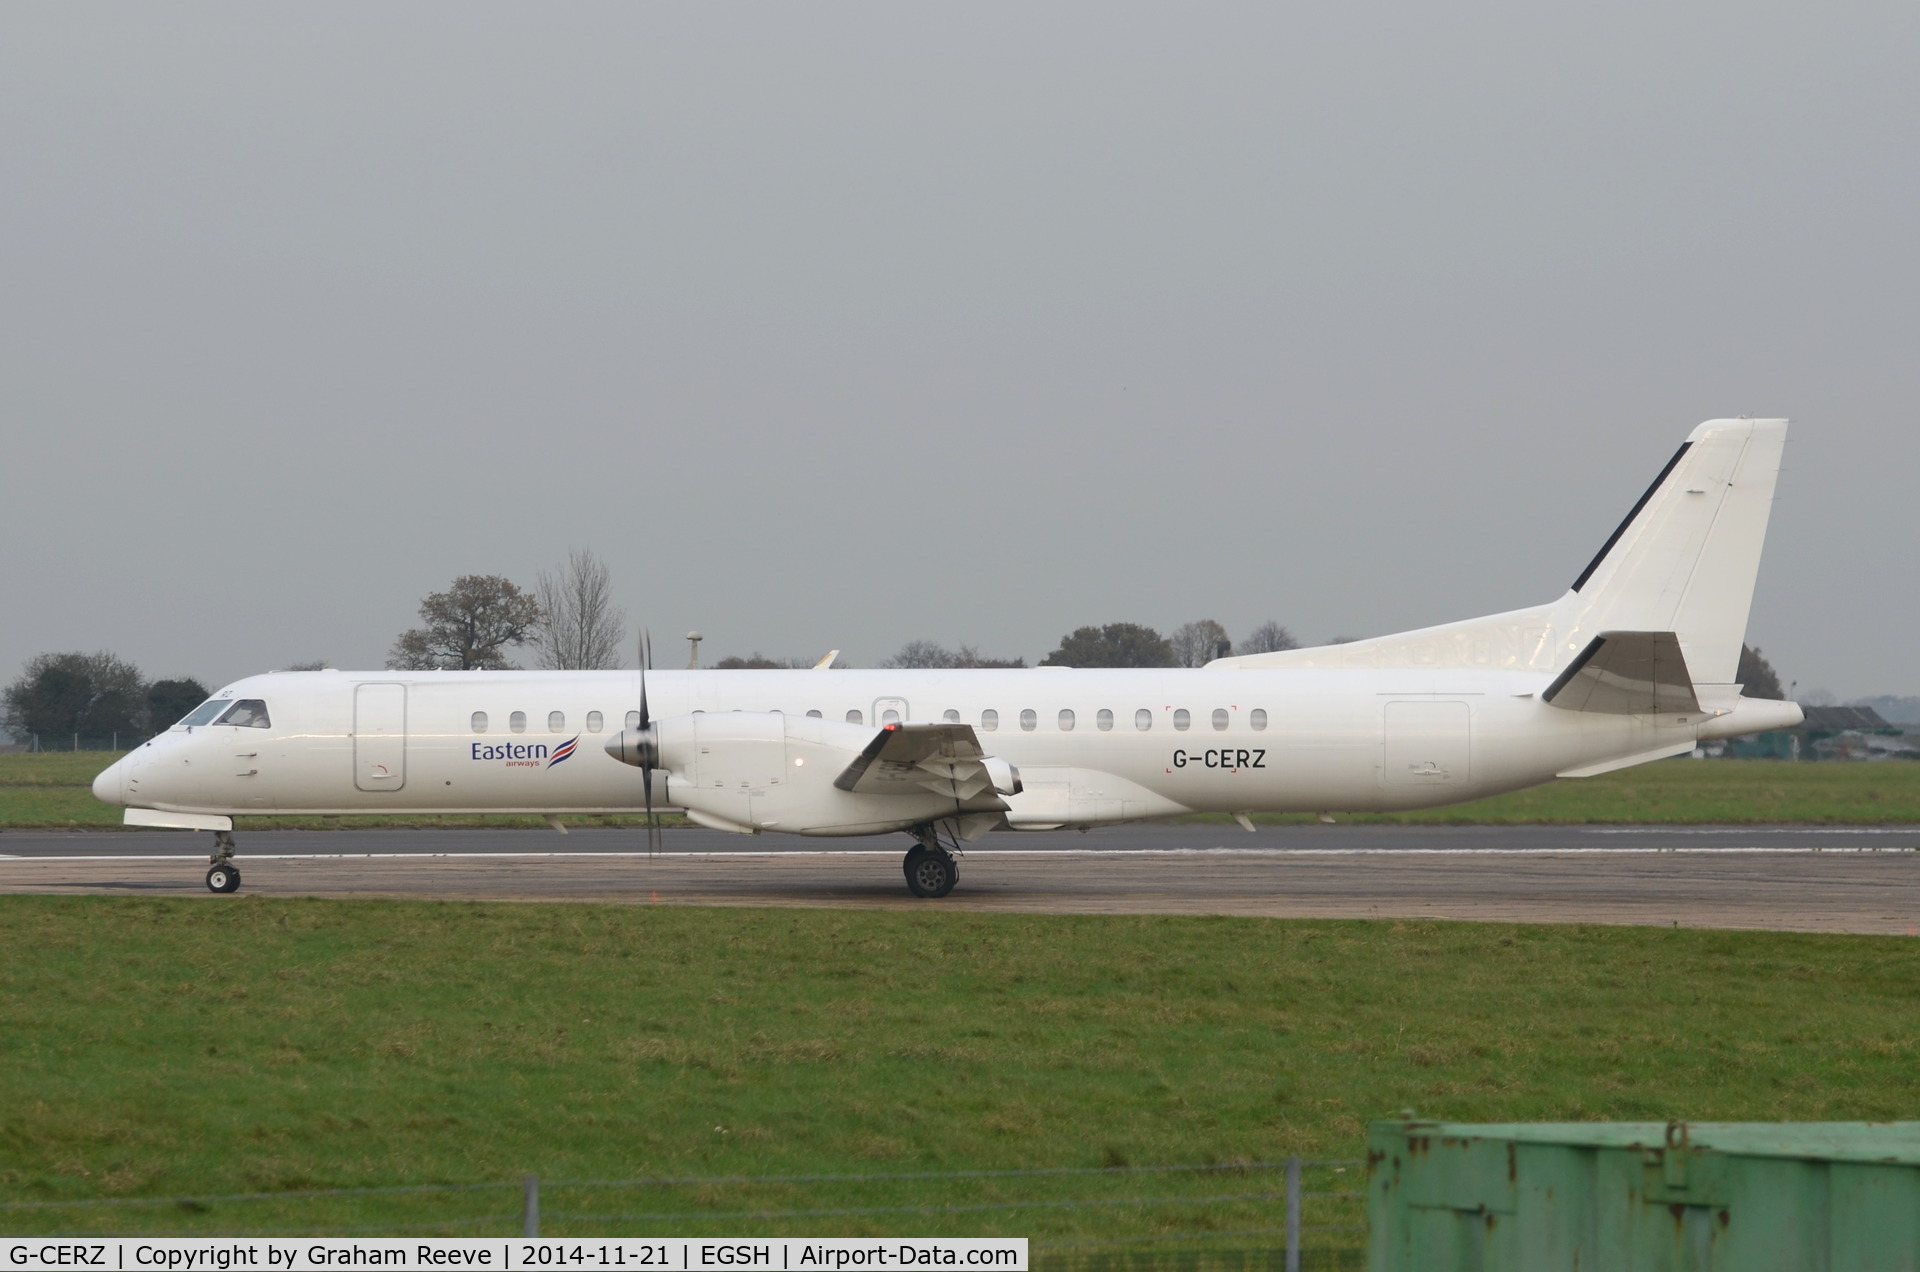 G-CERZ, 1997 Saab 2000 C/N 2000-042, About to depart from Norwich.